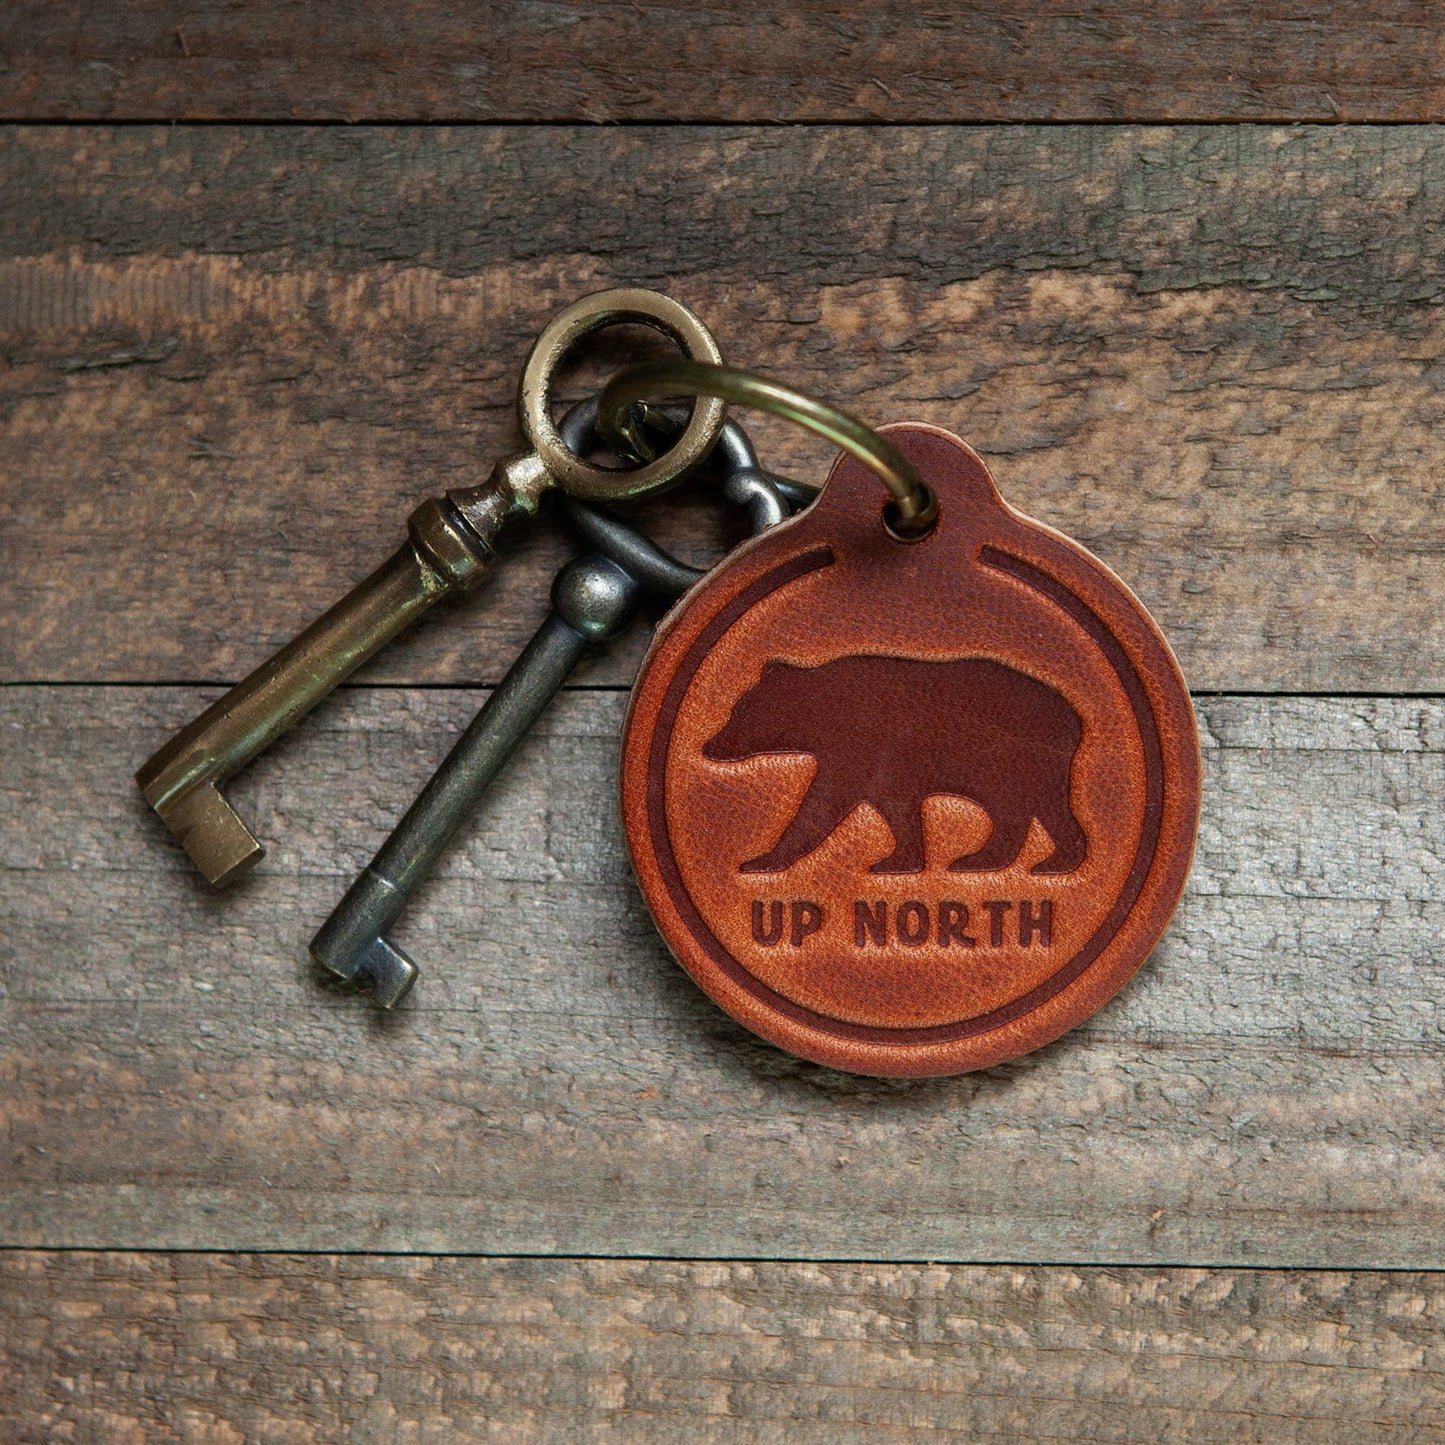 Up North Leather Keychain Circle